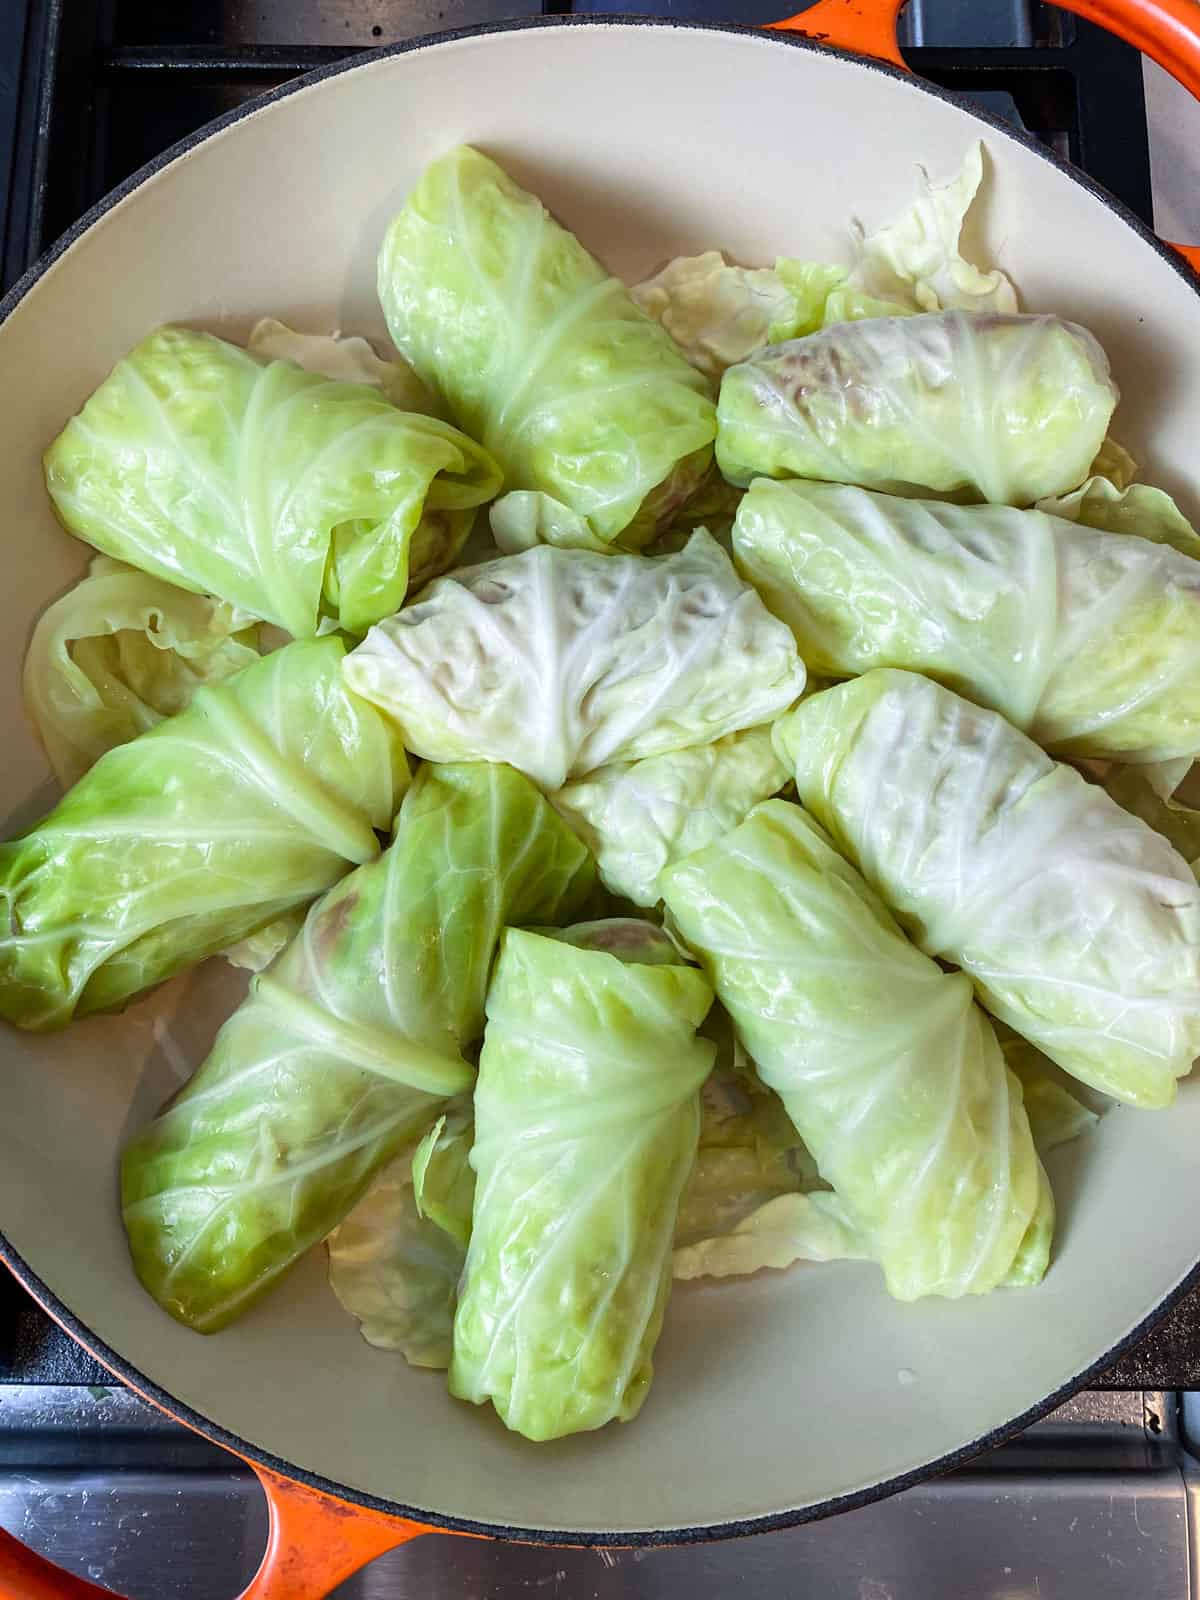 Nestle the stuffed cabbage rolls into a pot.